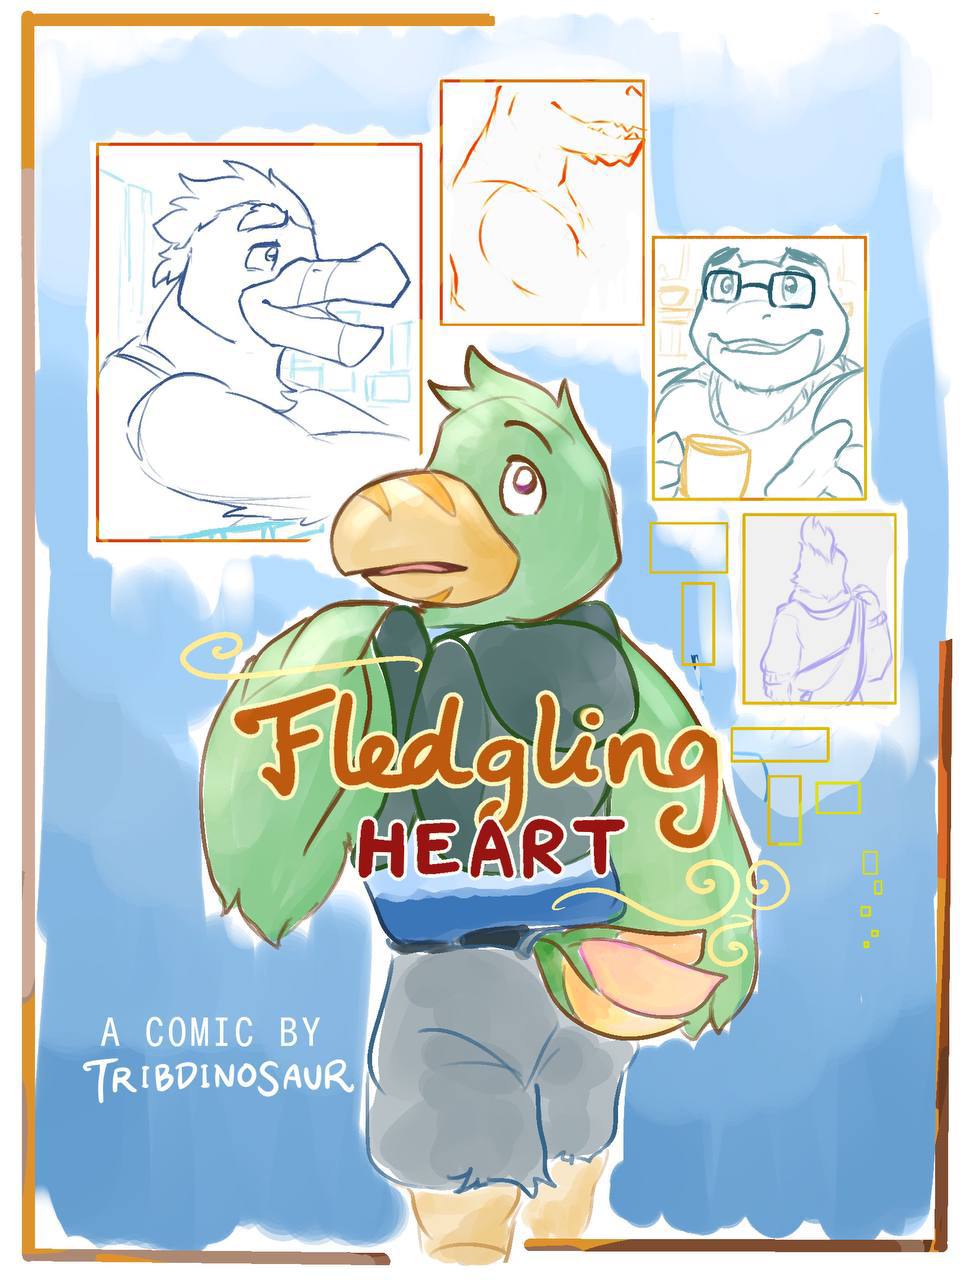 Fledgling Heart - cover page